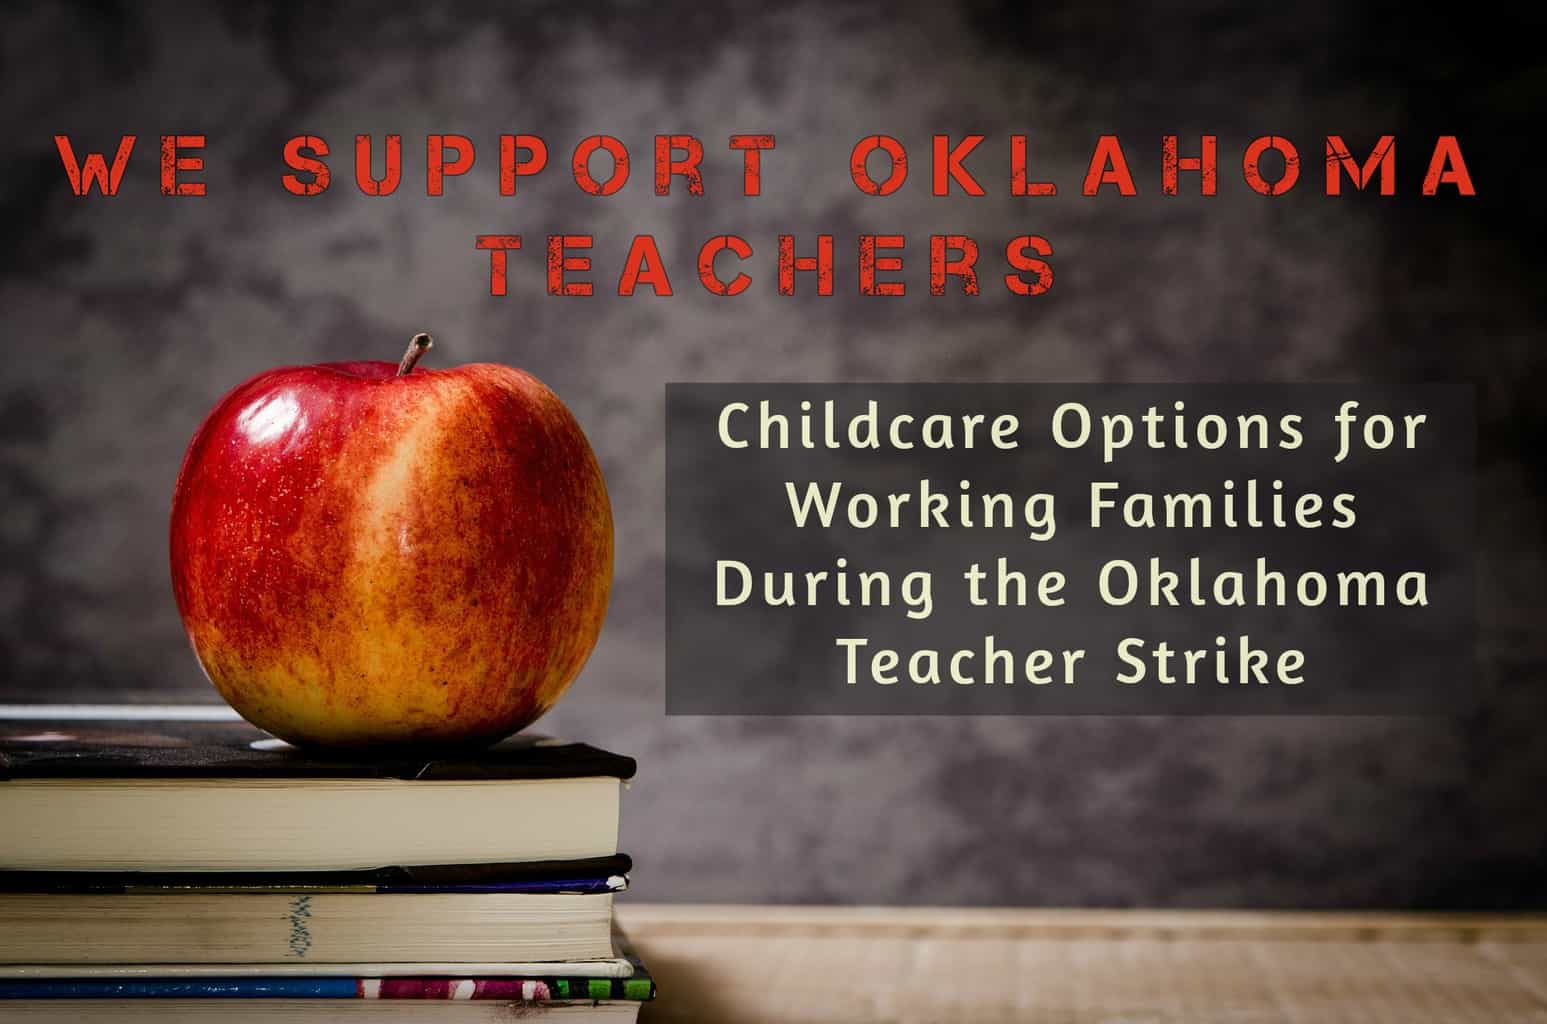 Childcare Options During the Oklahoma Teacher Walkout